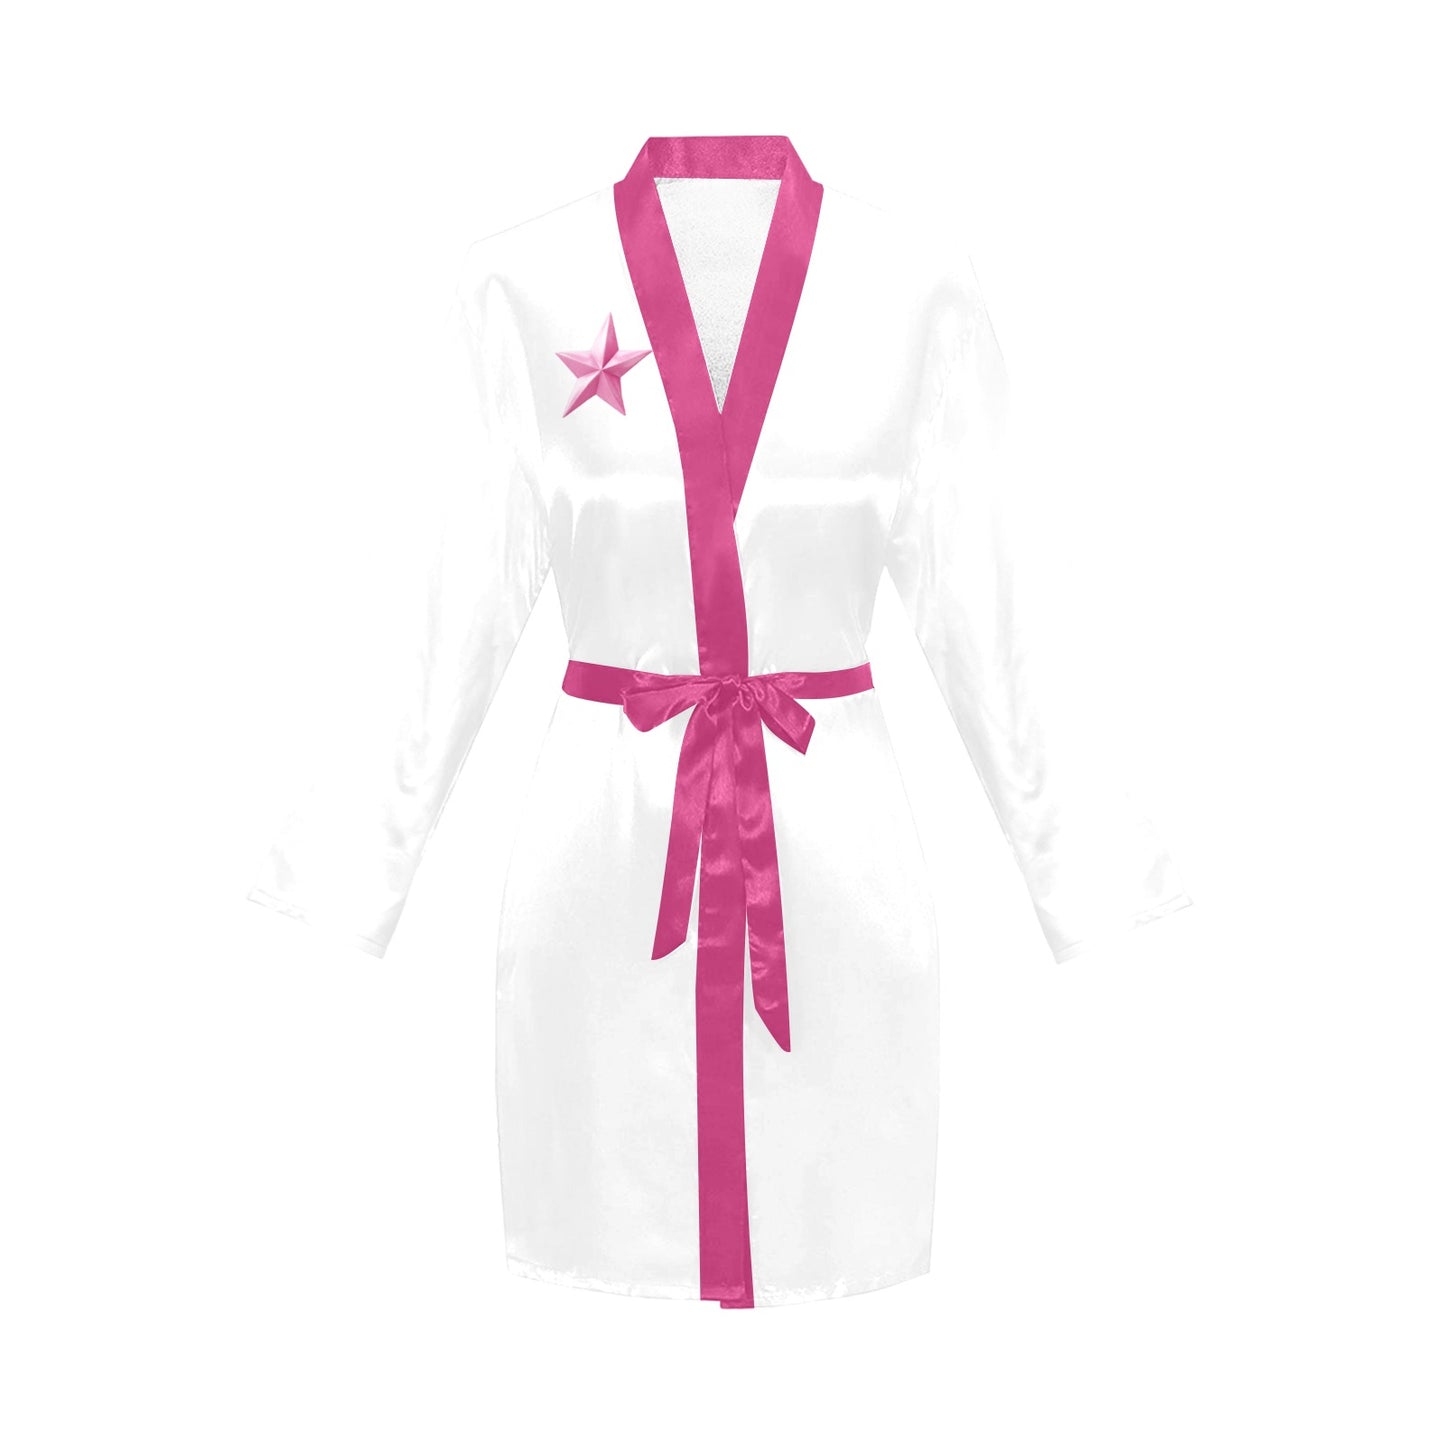 Bridesmaid Boots Women's Belted Satin Feel Dressing Lounge Robe